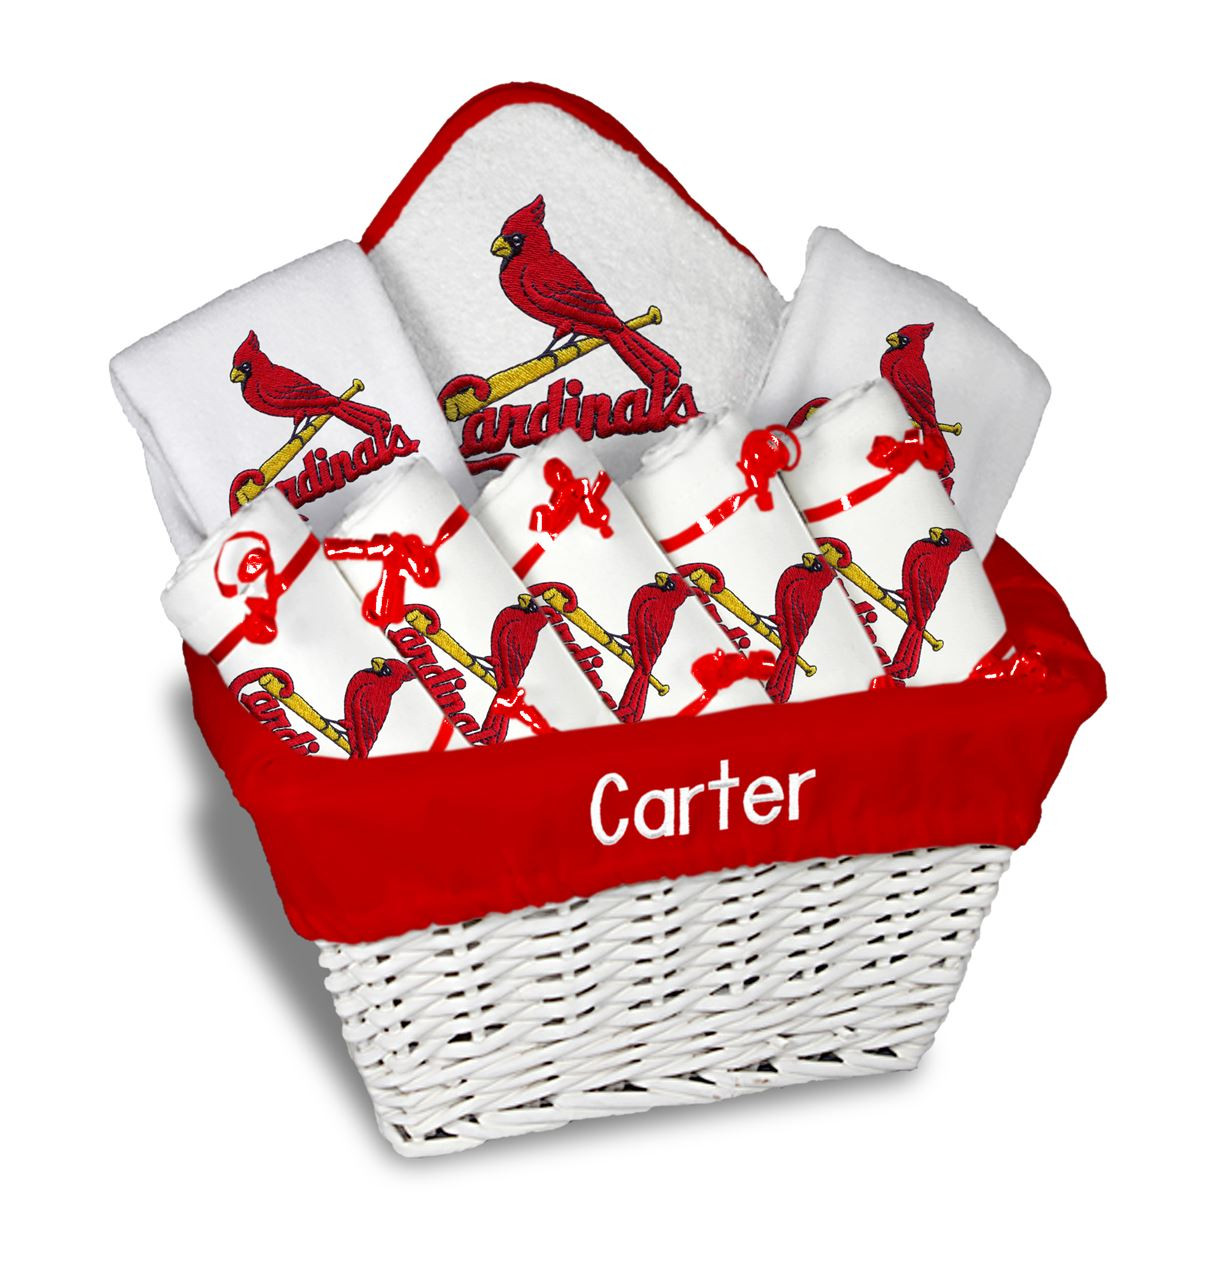 Stl Cardinals Personalized 9-Piece Gift Basket